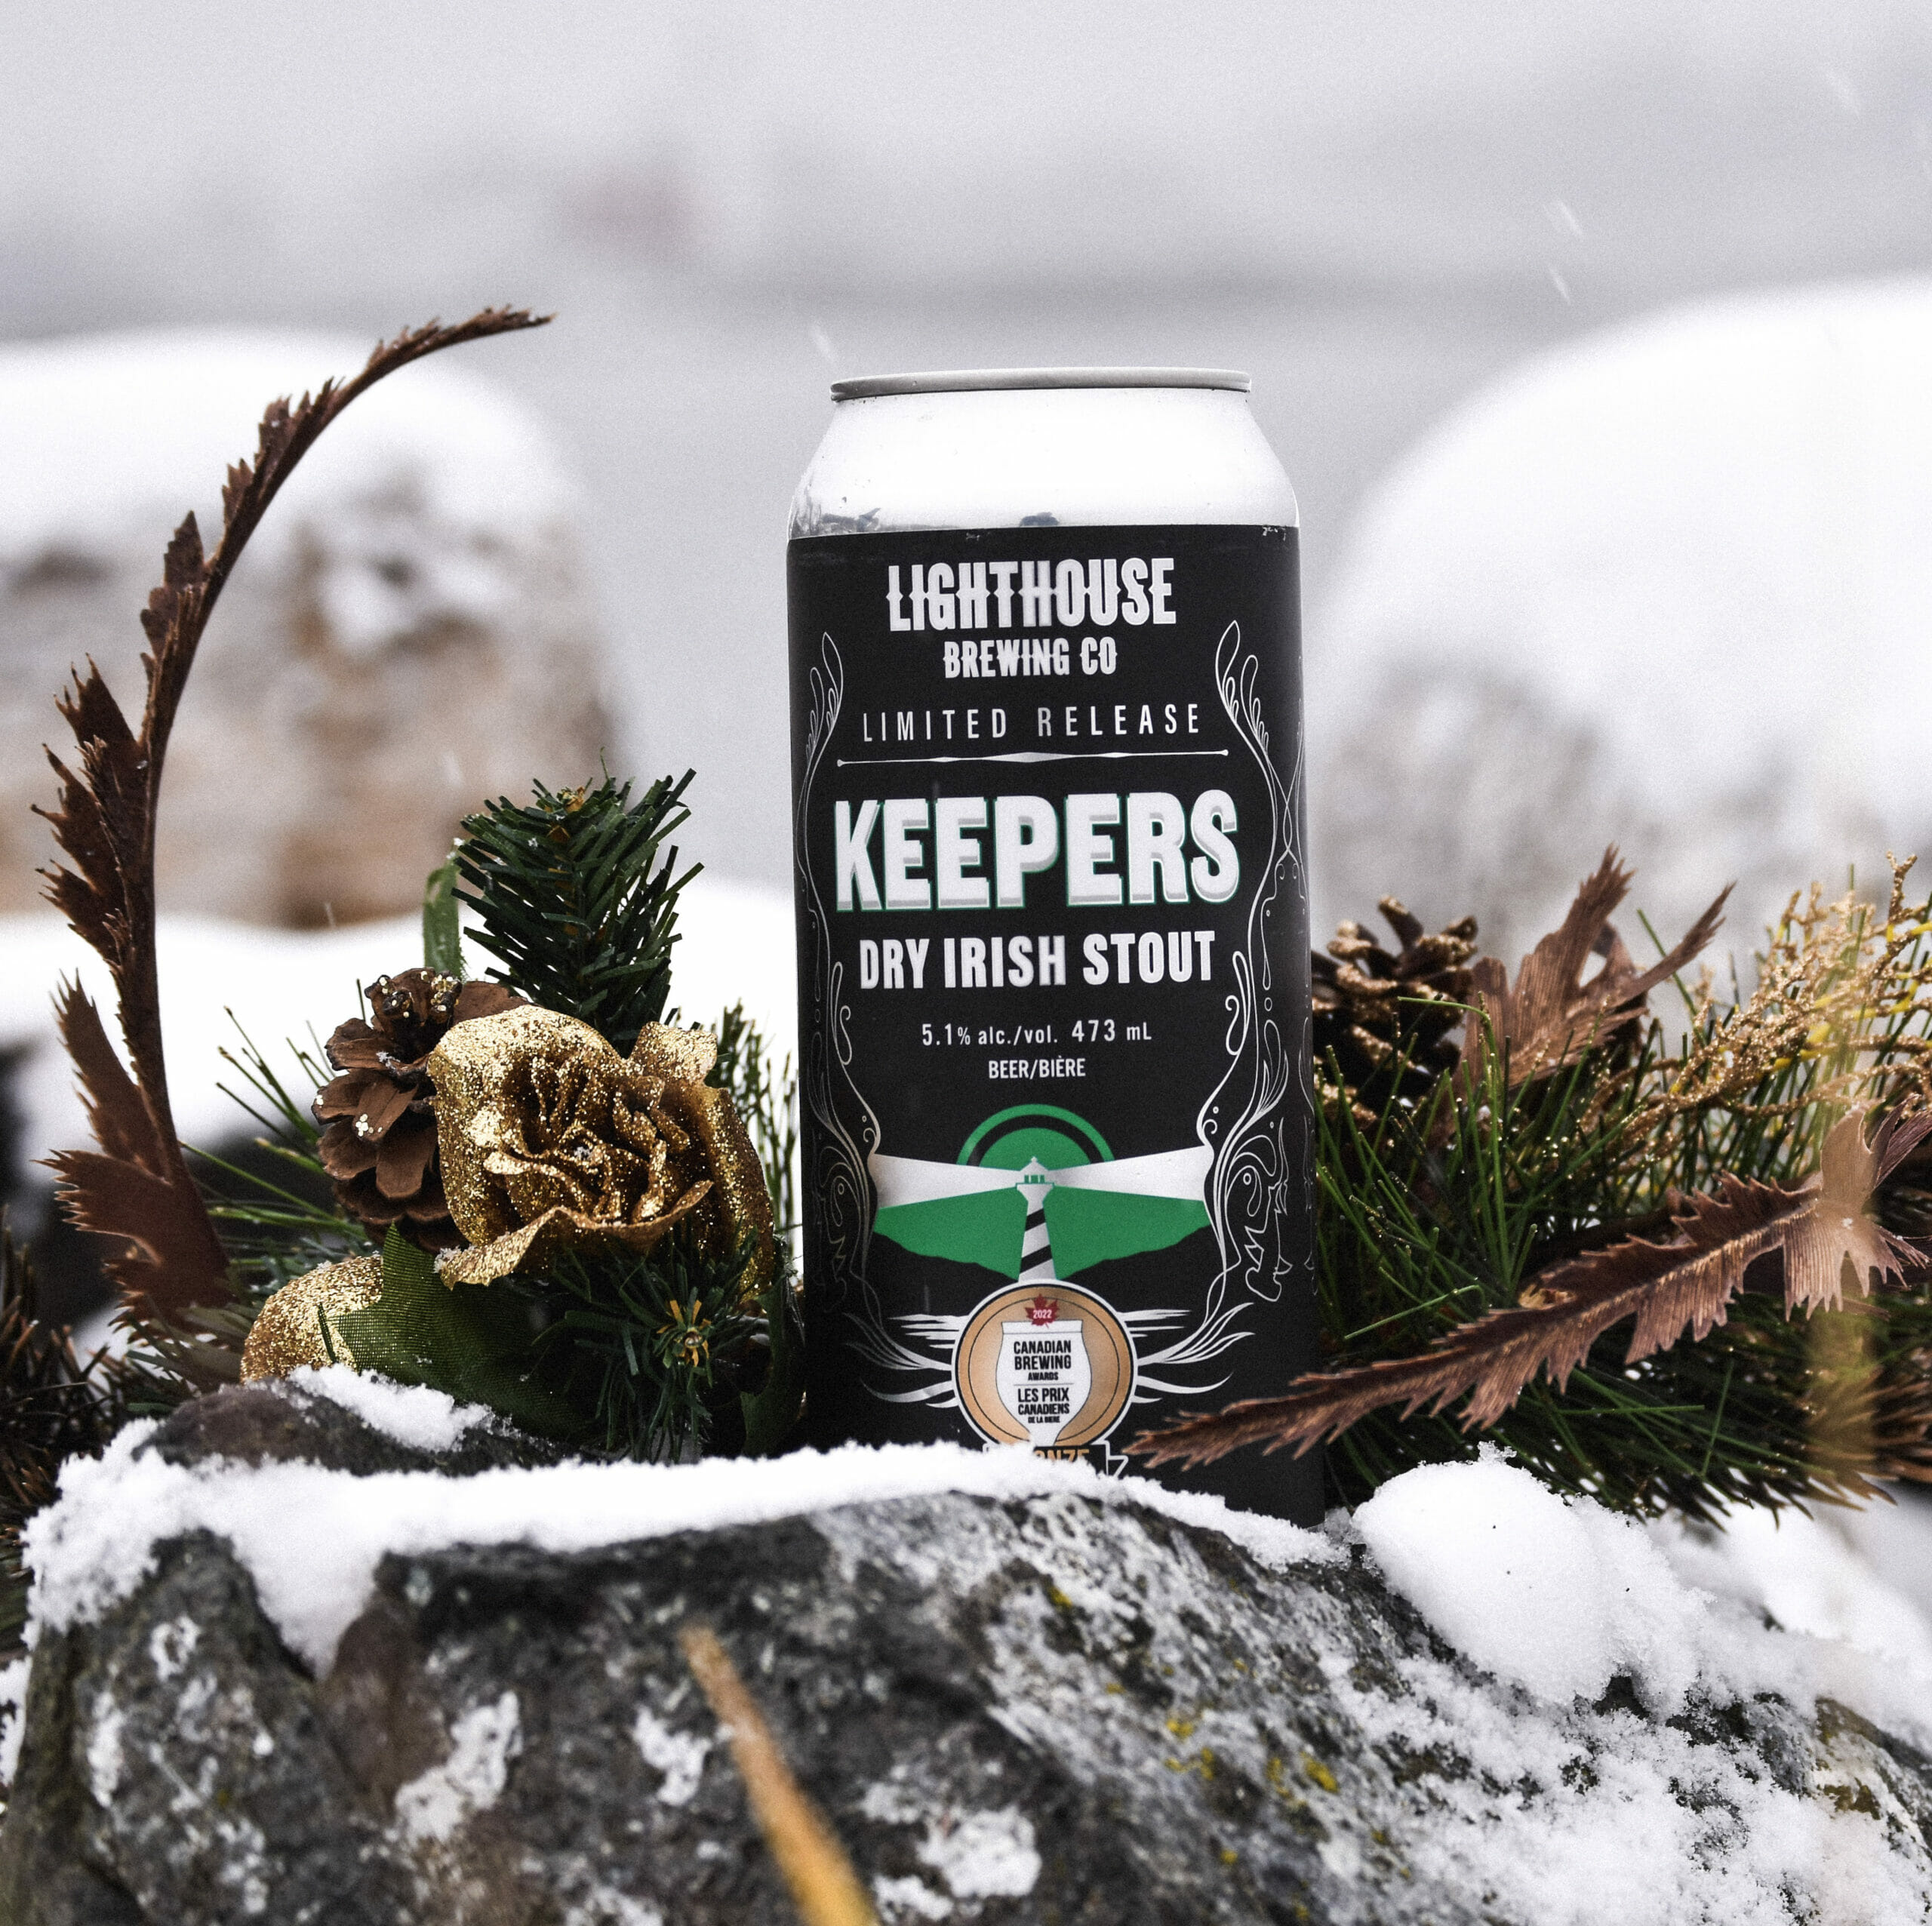 Keepers Dry Irish Stout - Lighthouse Brewing